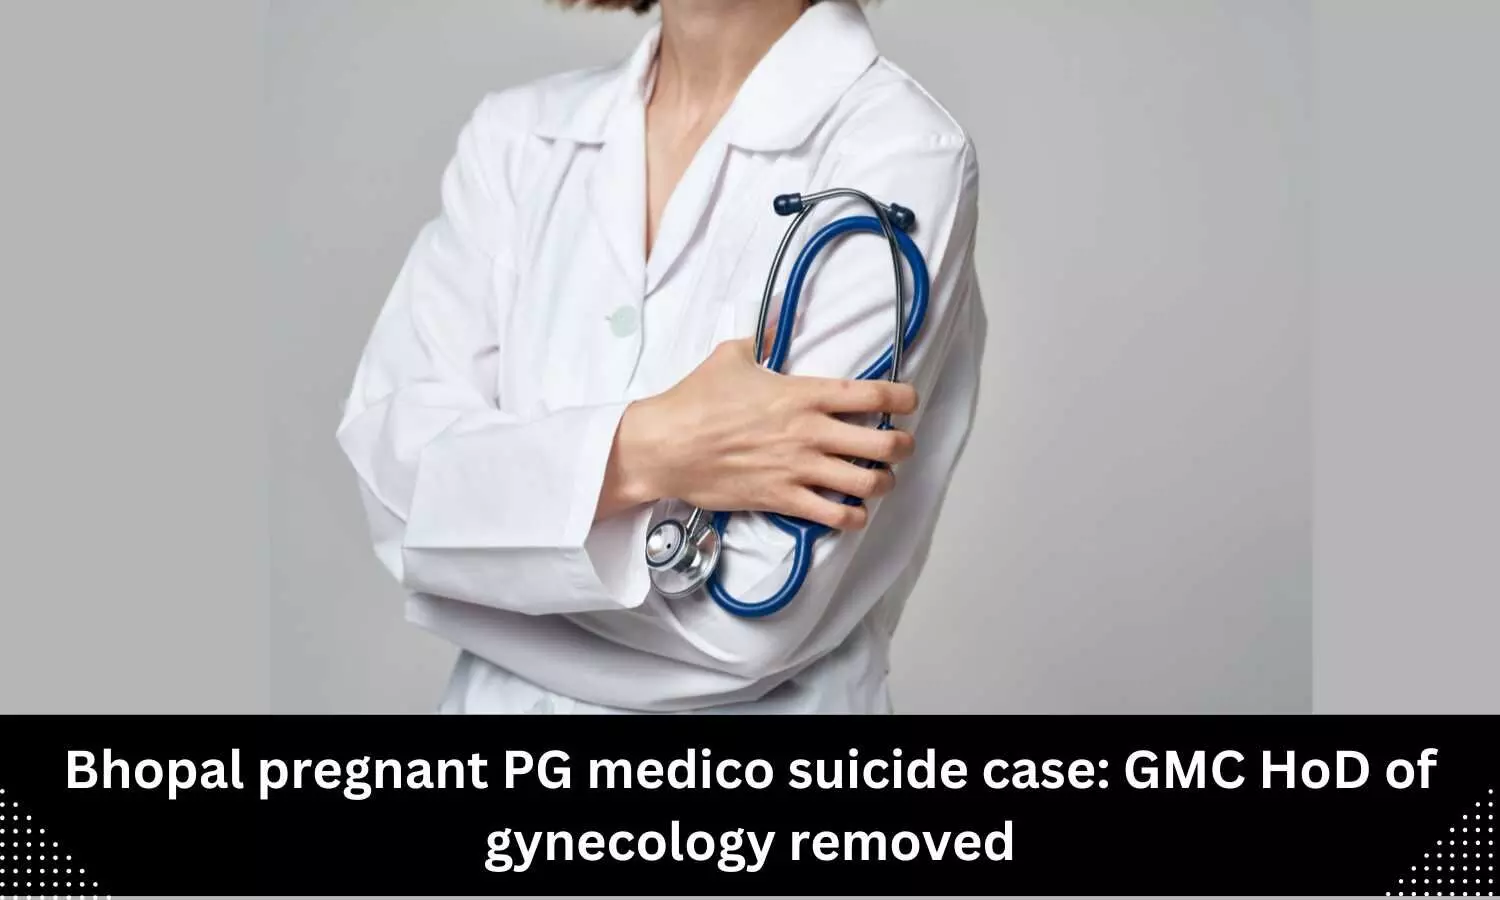 Bhopal pregnant PG medico suicide case: GMC HoD of gynecology removed